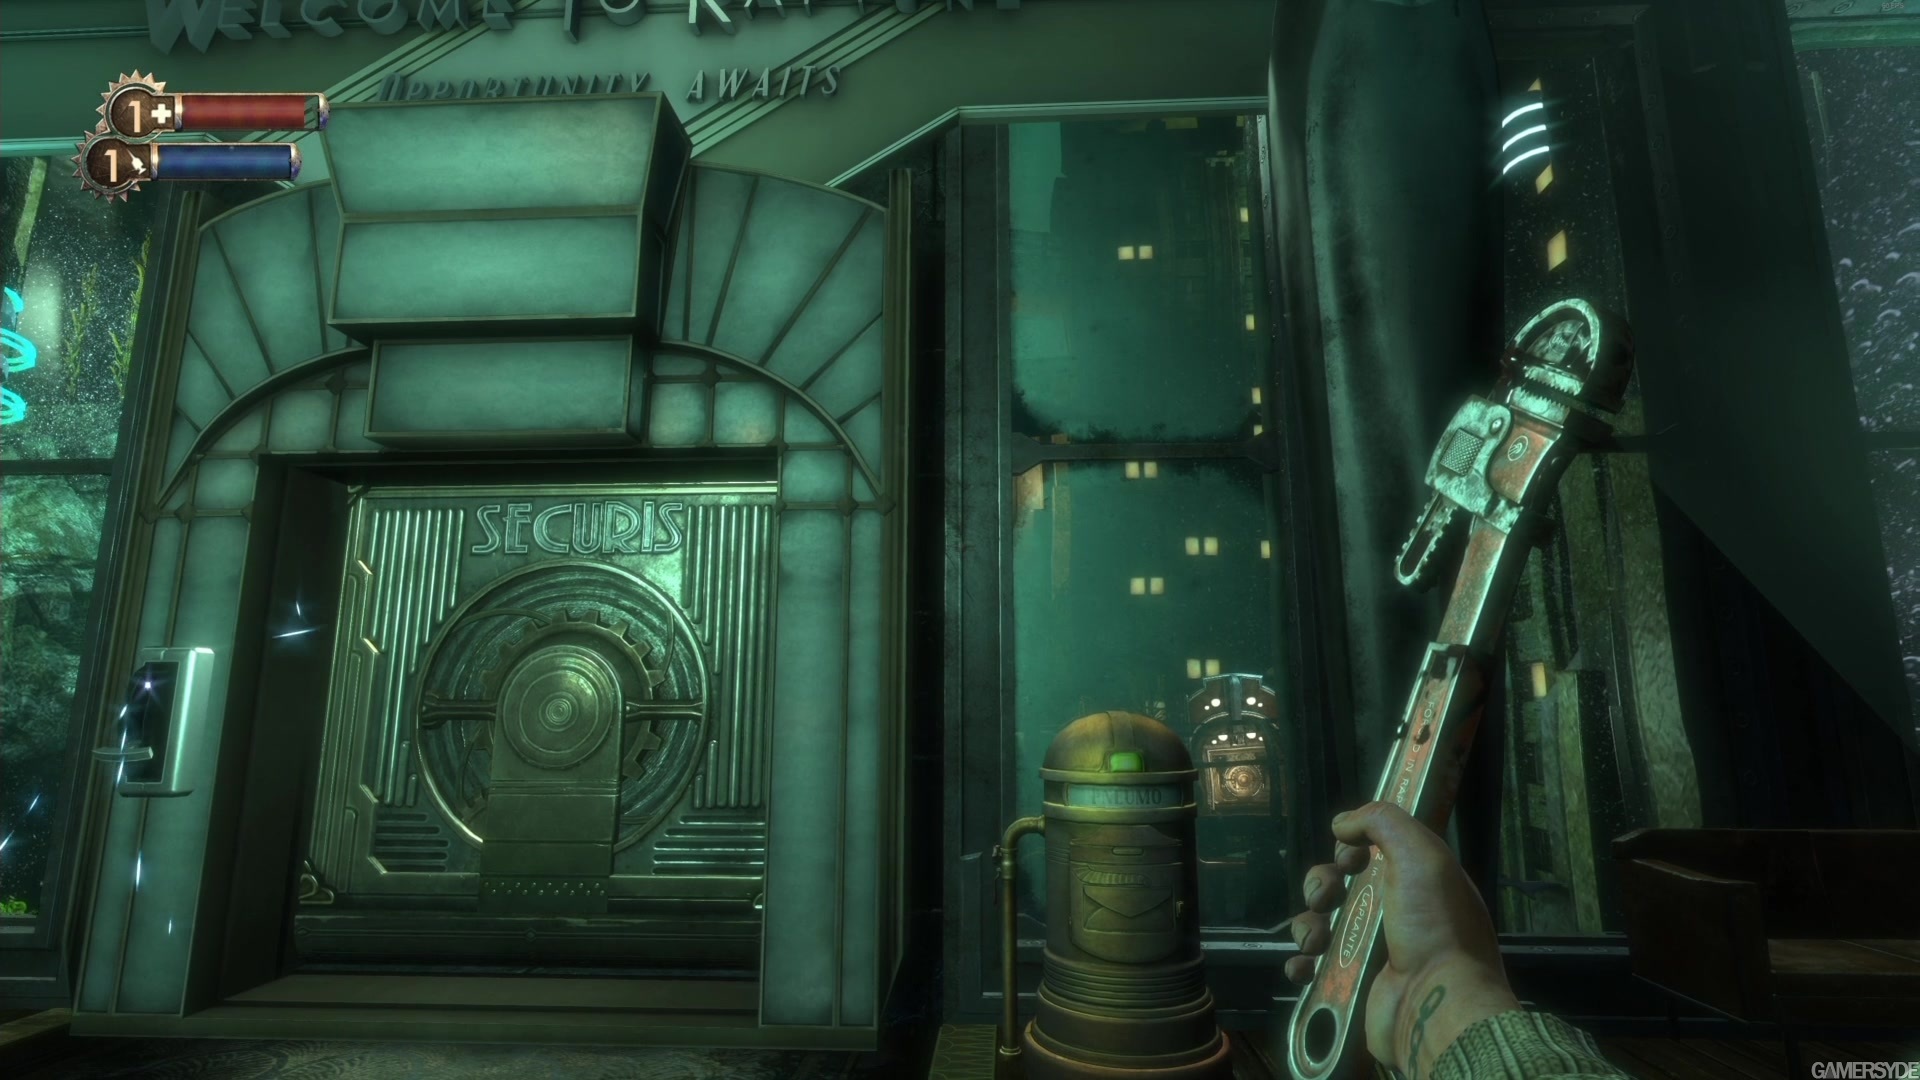 bioshock the collection steam download